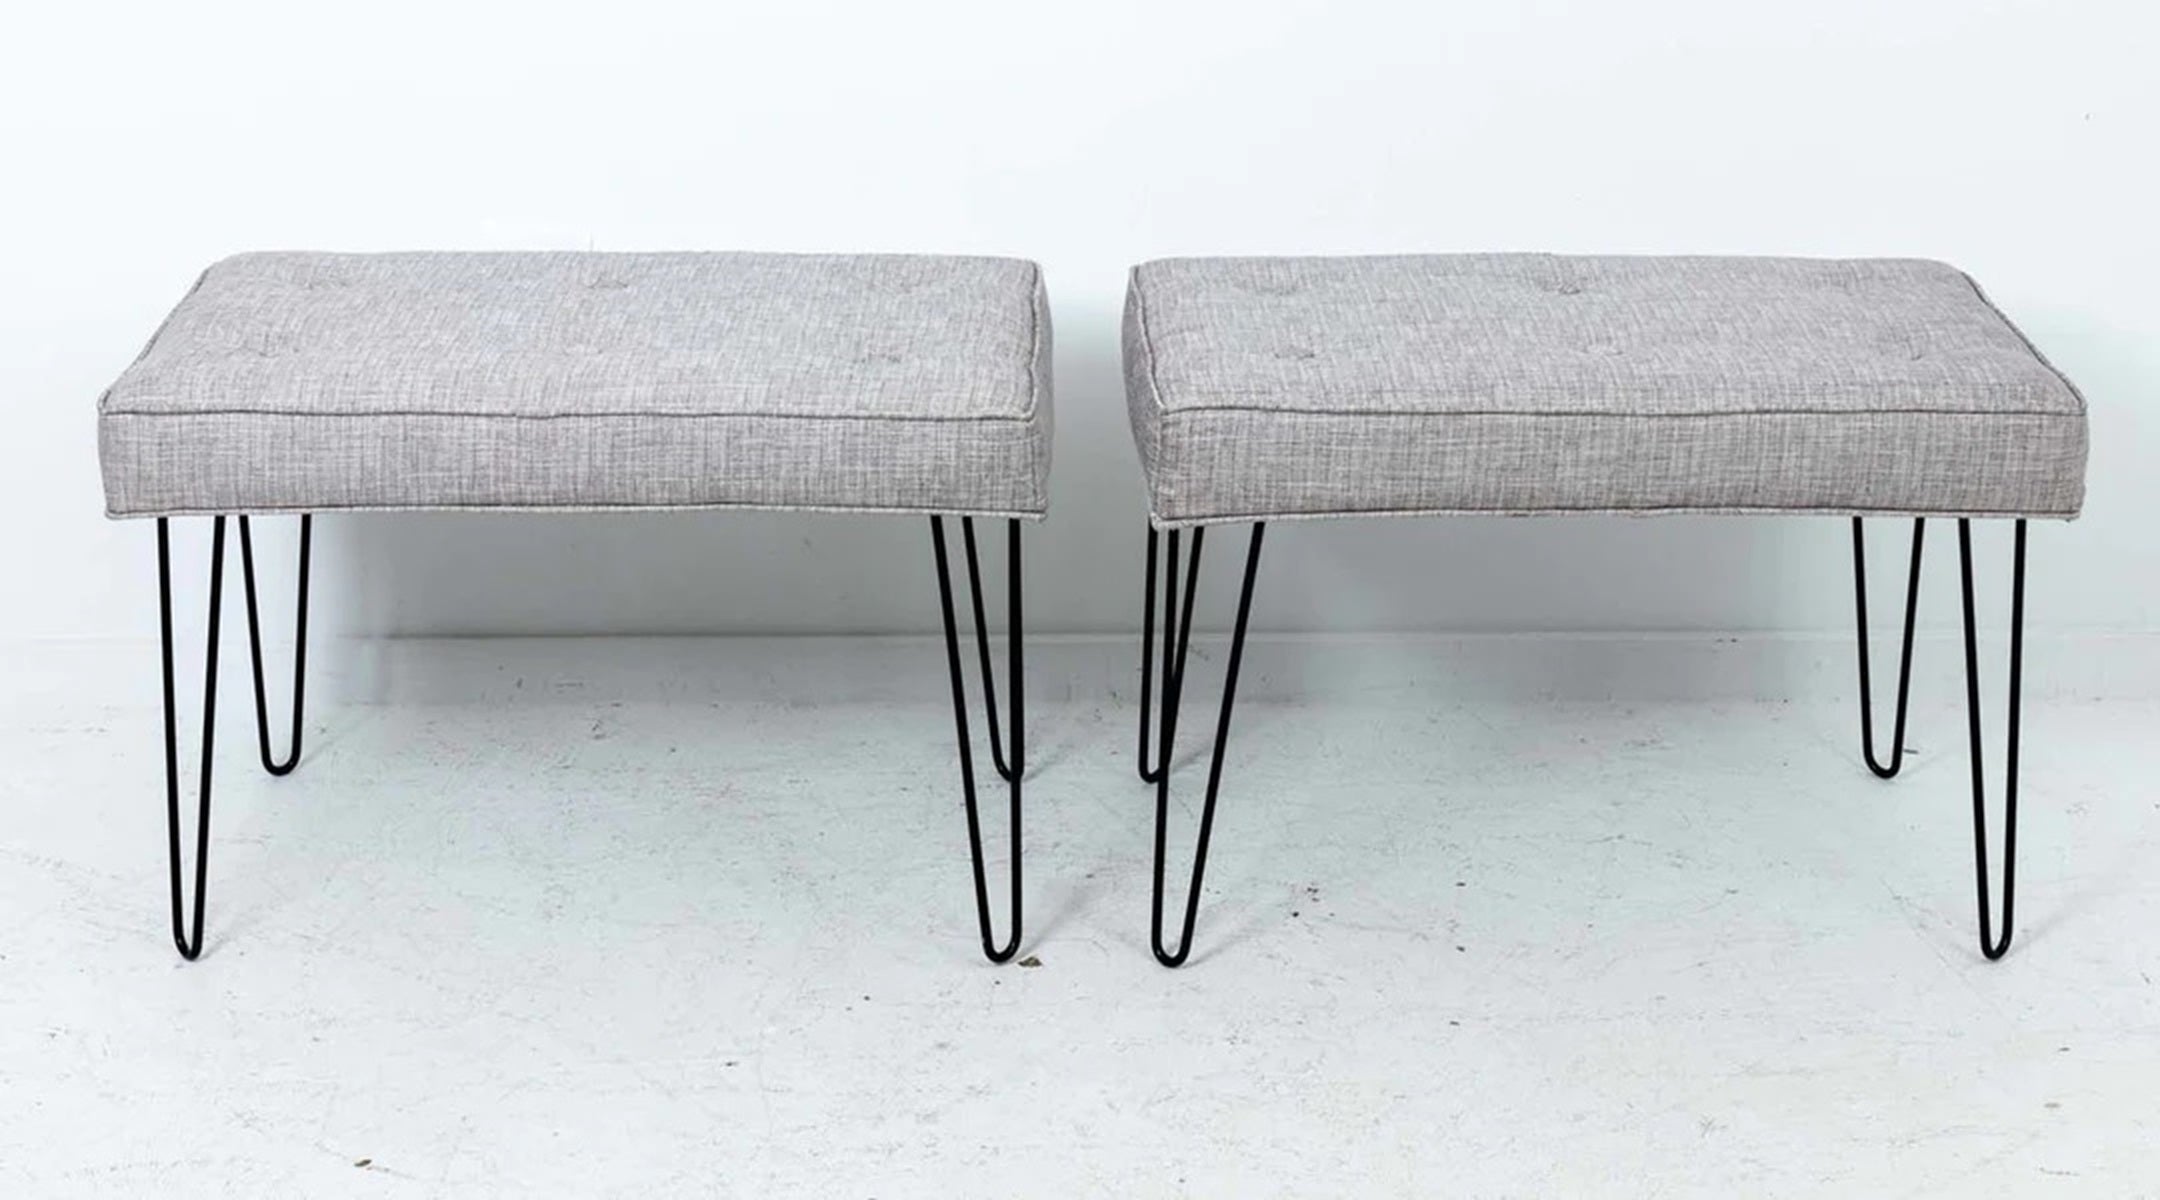 Circa 21st century pair of Mid-Century Modern style newly made upholstered benches with satin black hairpin shaped legs and new  upholstered seats with buttons and welting. Price is for the pair. Made in the United States. Good overall condition.